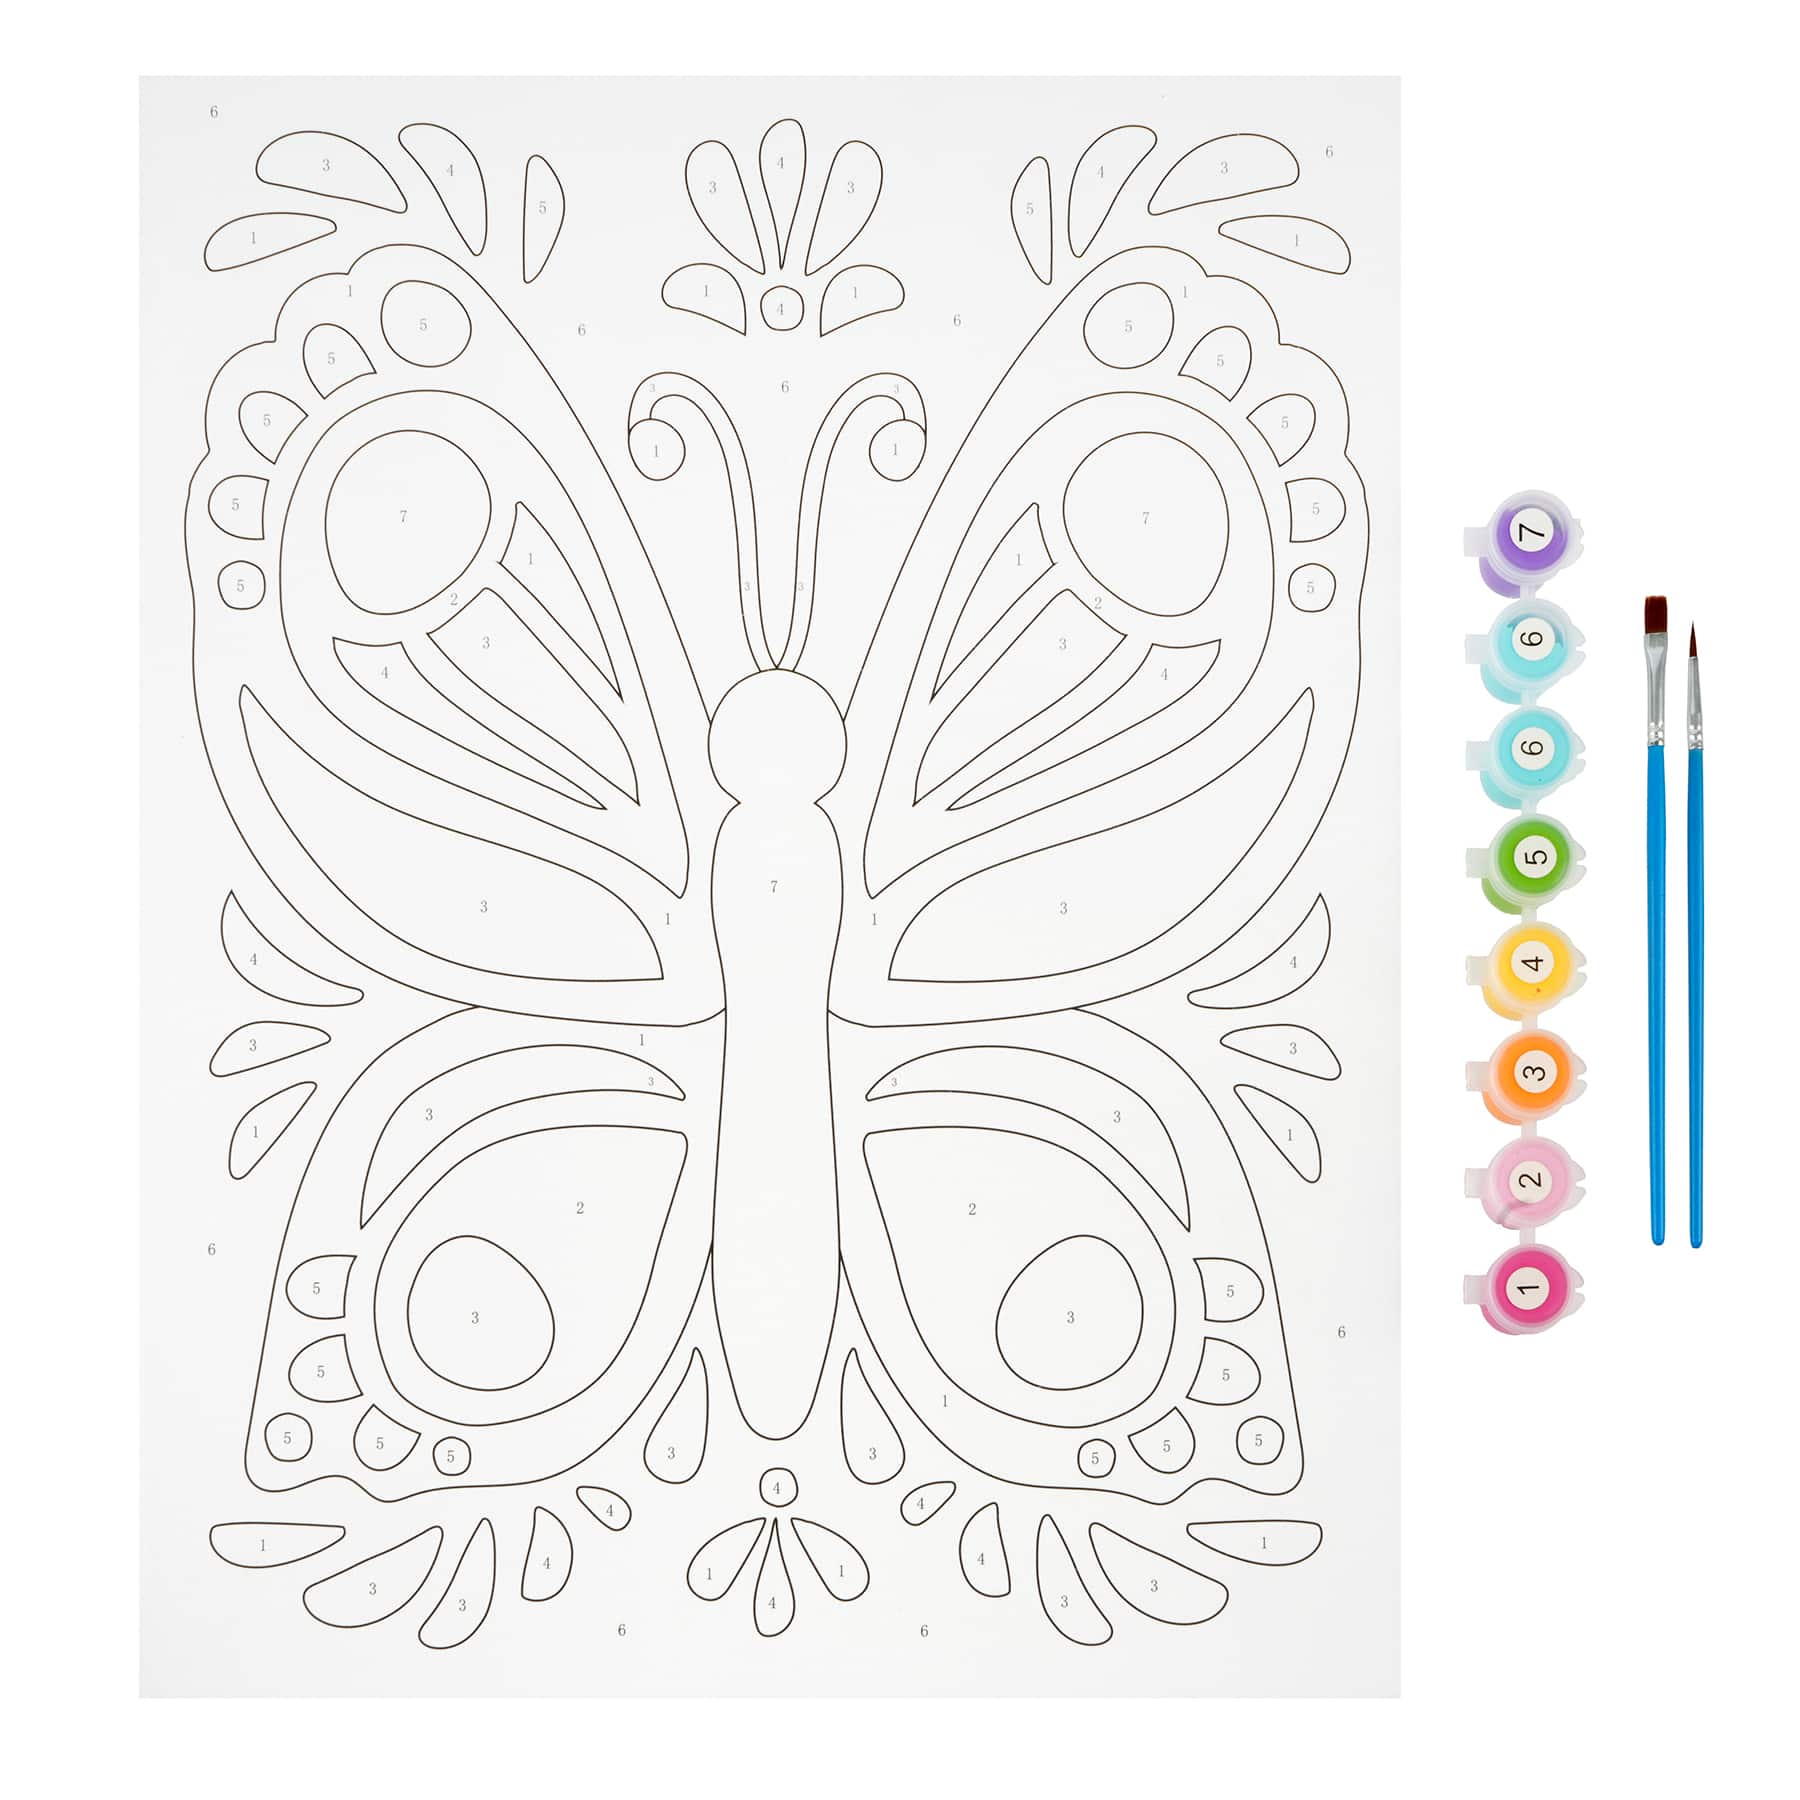 Butterfly Paint by Number Kit by Creatology&#x2122;